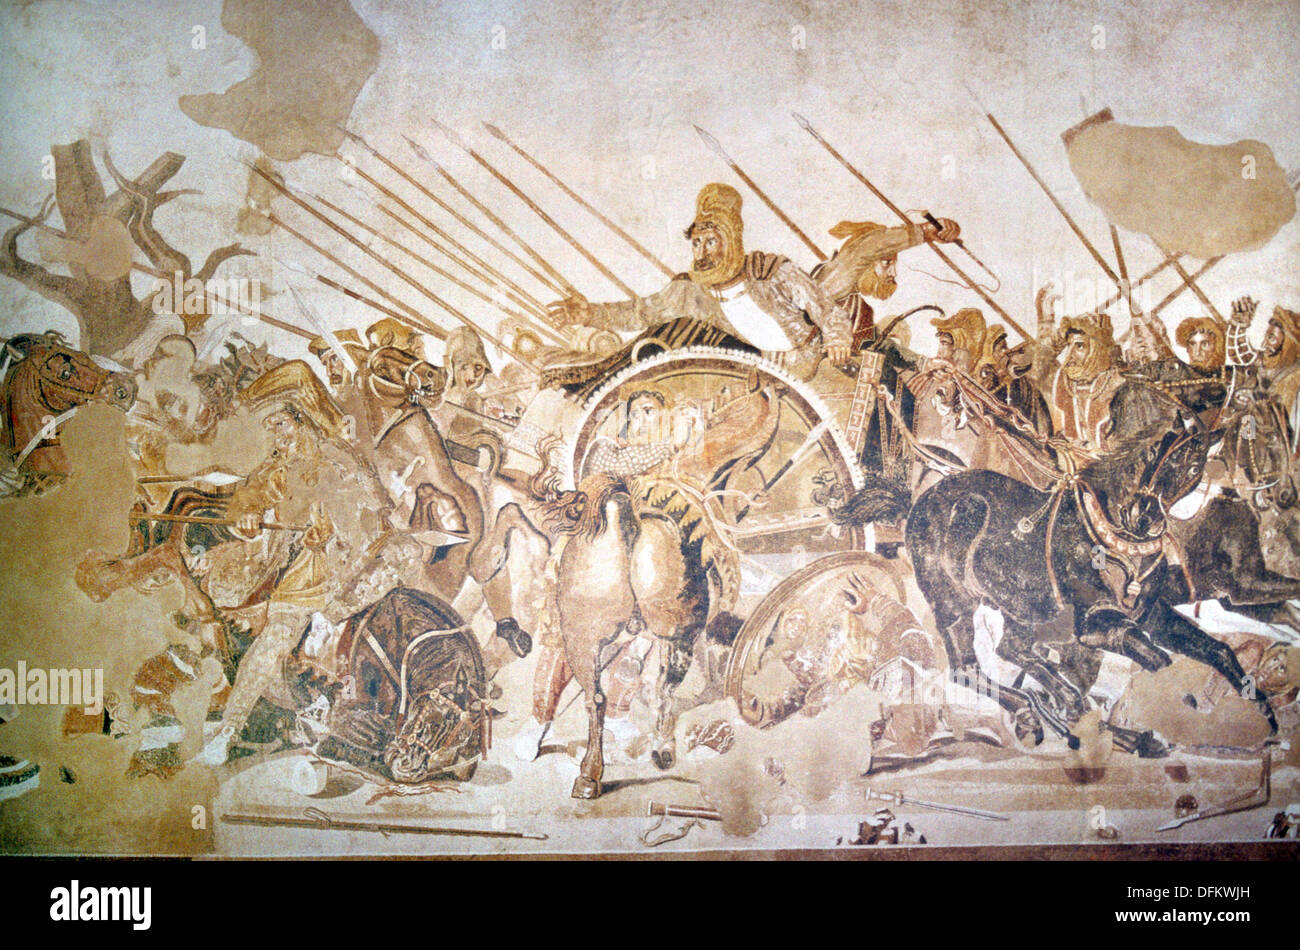 Mosaic of Darius II of Persia (in Chariot) versus Alexander the Great, or Alexander II of Madedon, at the First Battle of Issus (333BC) Stock Photo